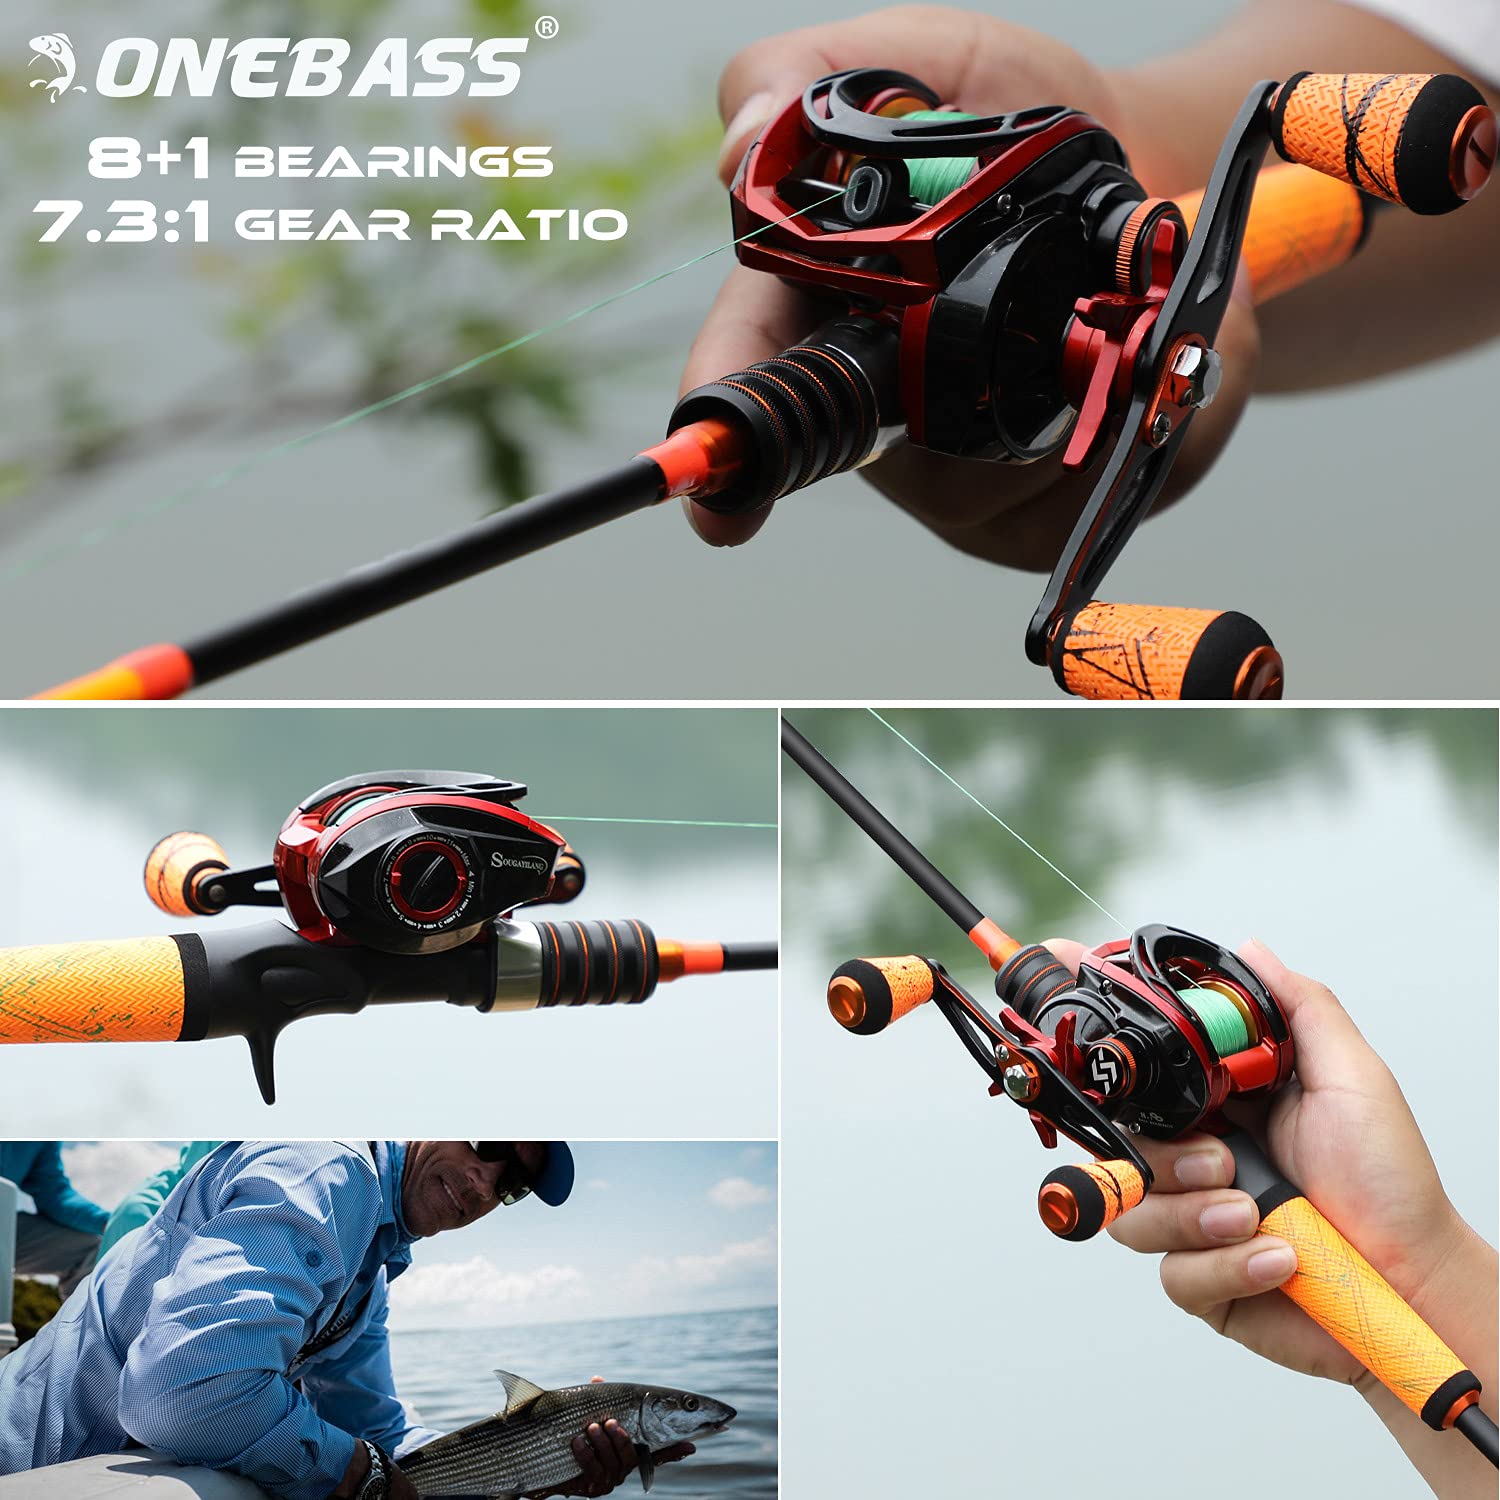  Fishing Rod and Reel Combo - 6.9ft Telescopic Spincast Rod  with Left Handed Baitcasting Reel Combos - Sea Saltwater Freshwater Ice Bass  Fishing Tackle Set - Fishing Rods Kit : Sports & Outdoors